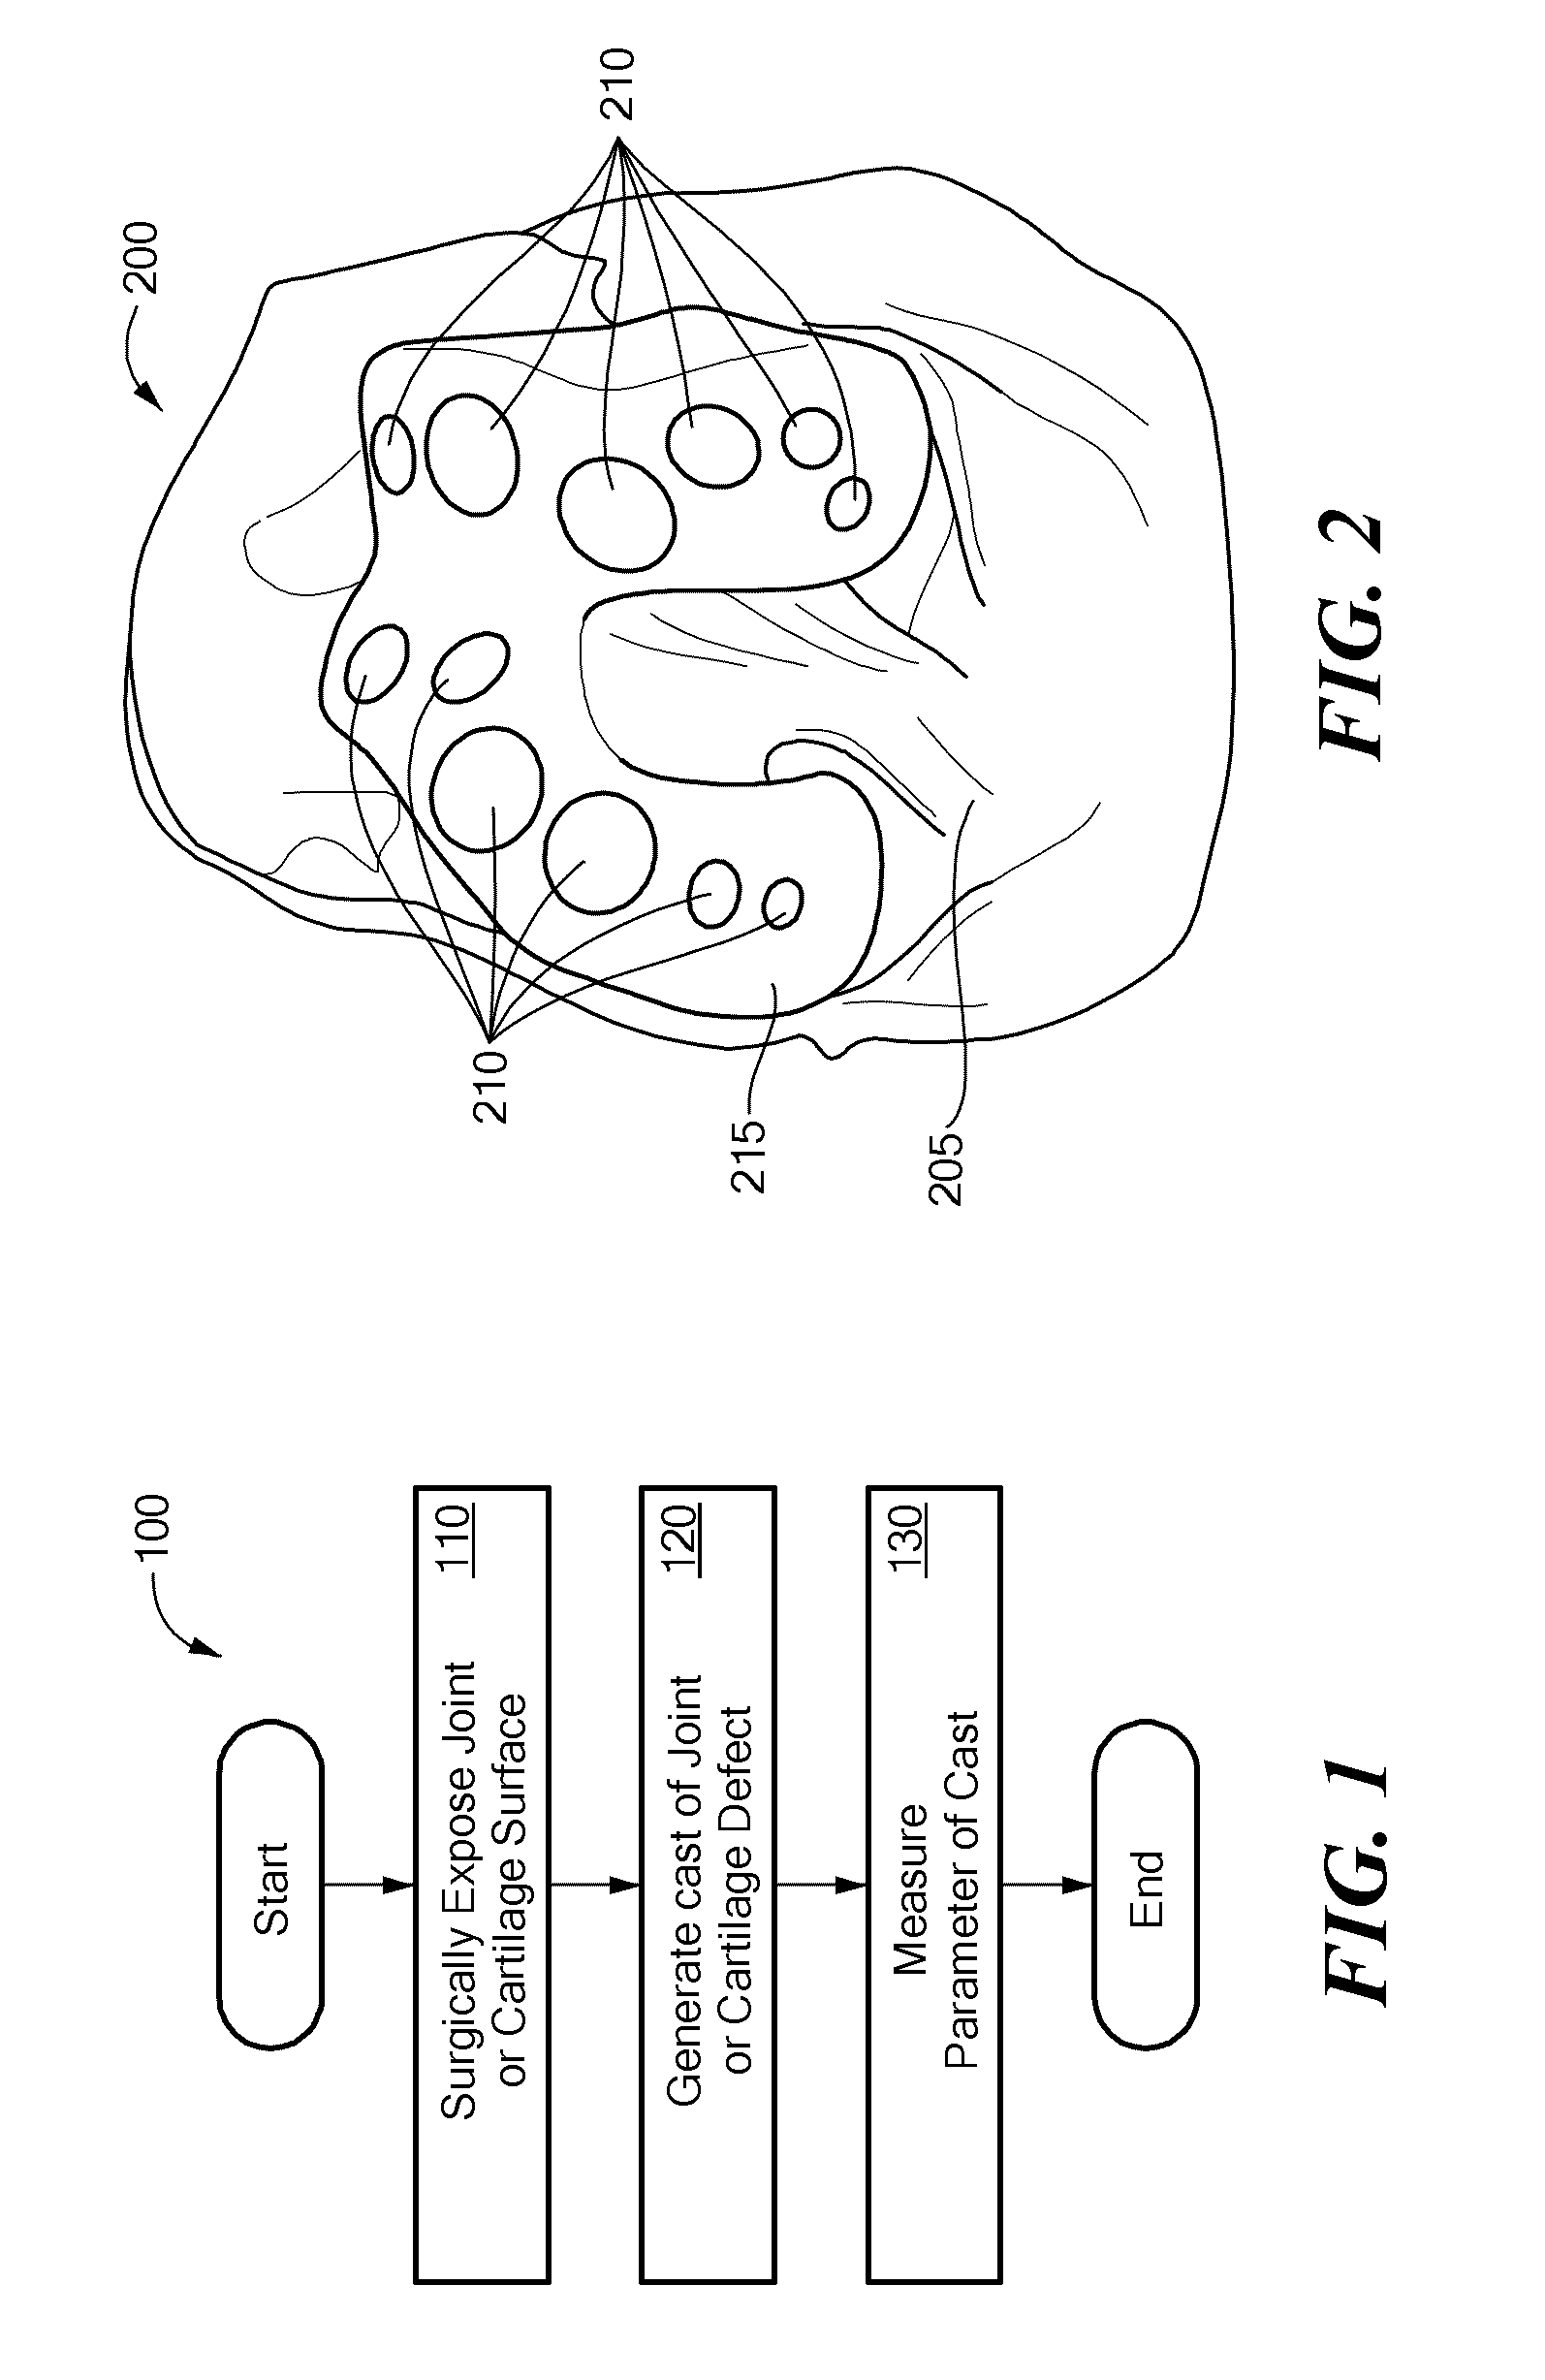 Methods and devices for quantitative analysis of bone and cartilage